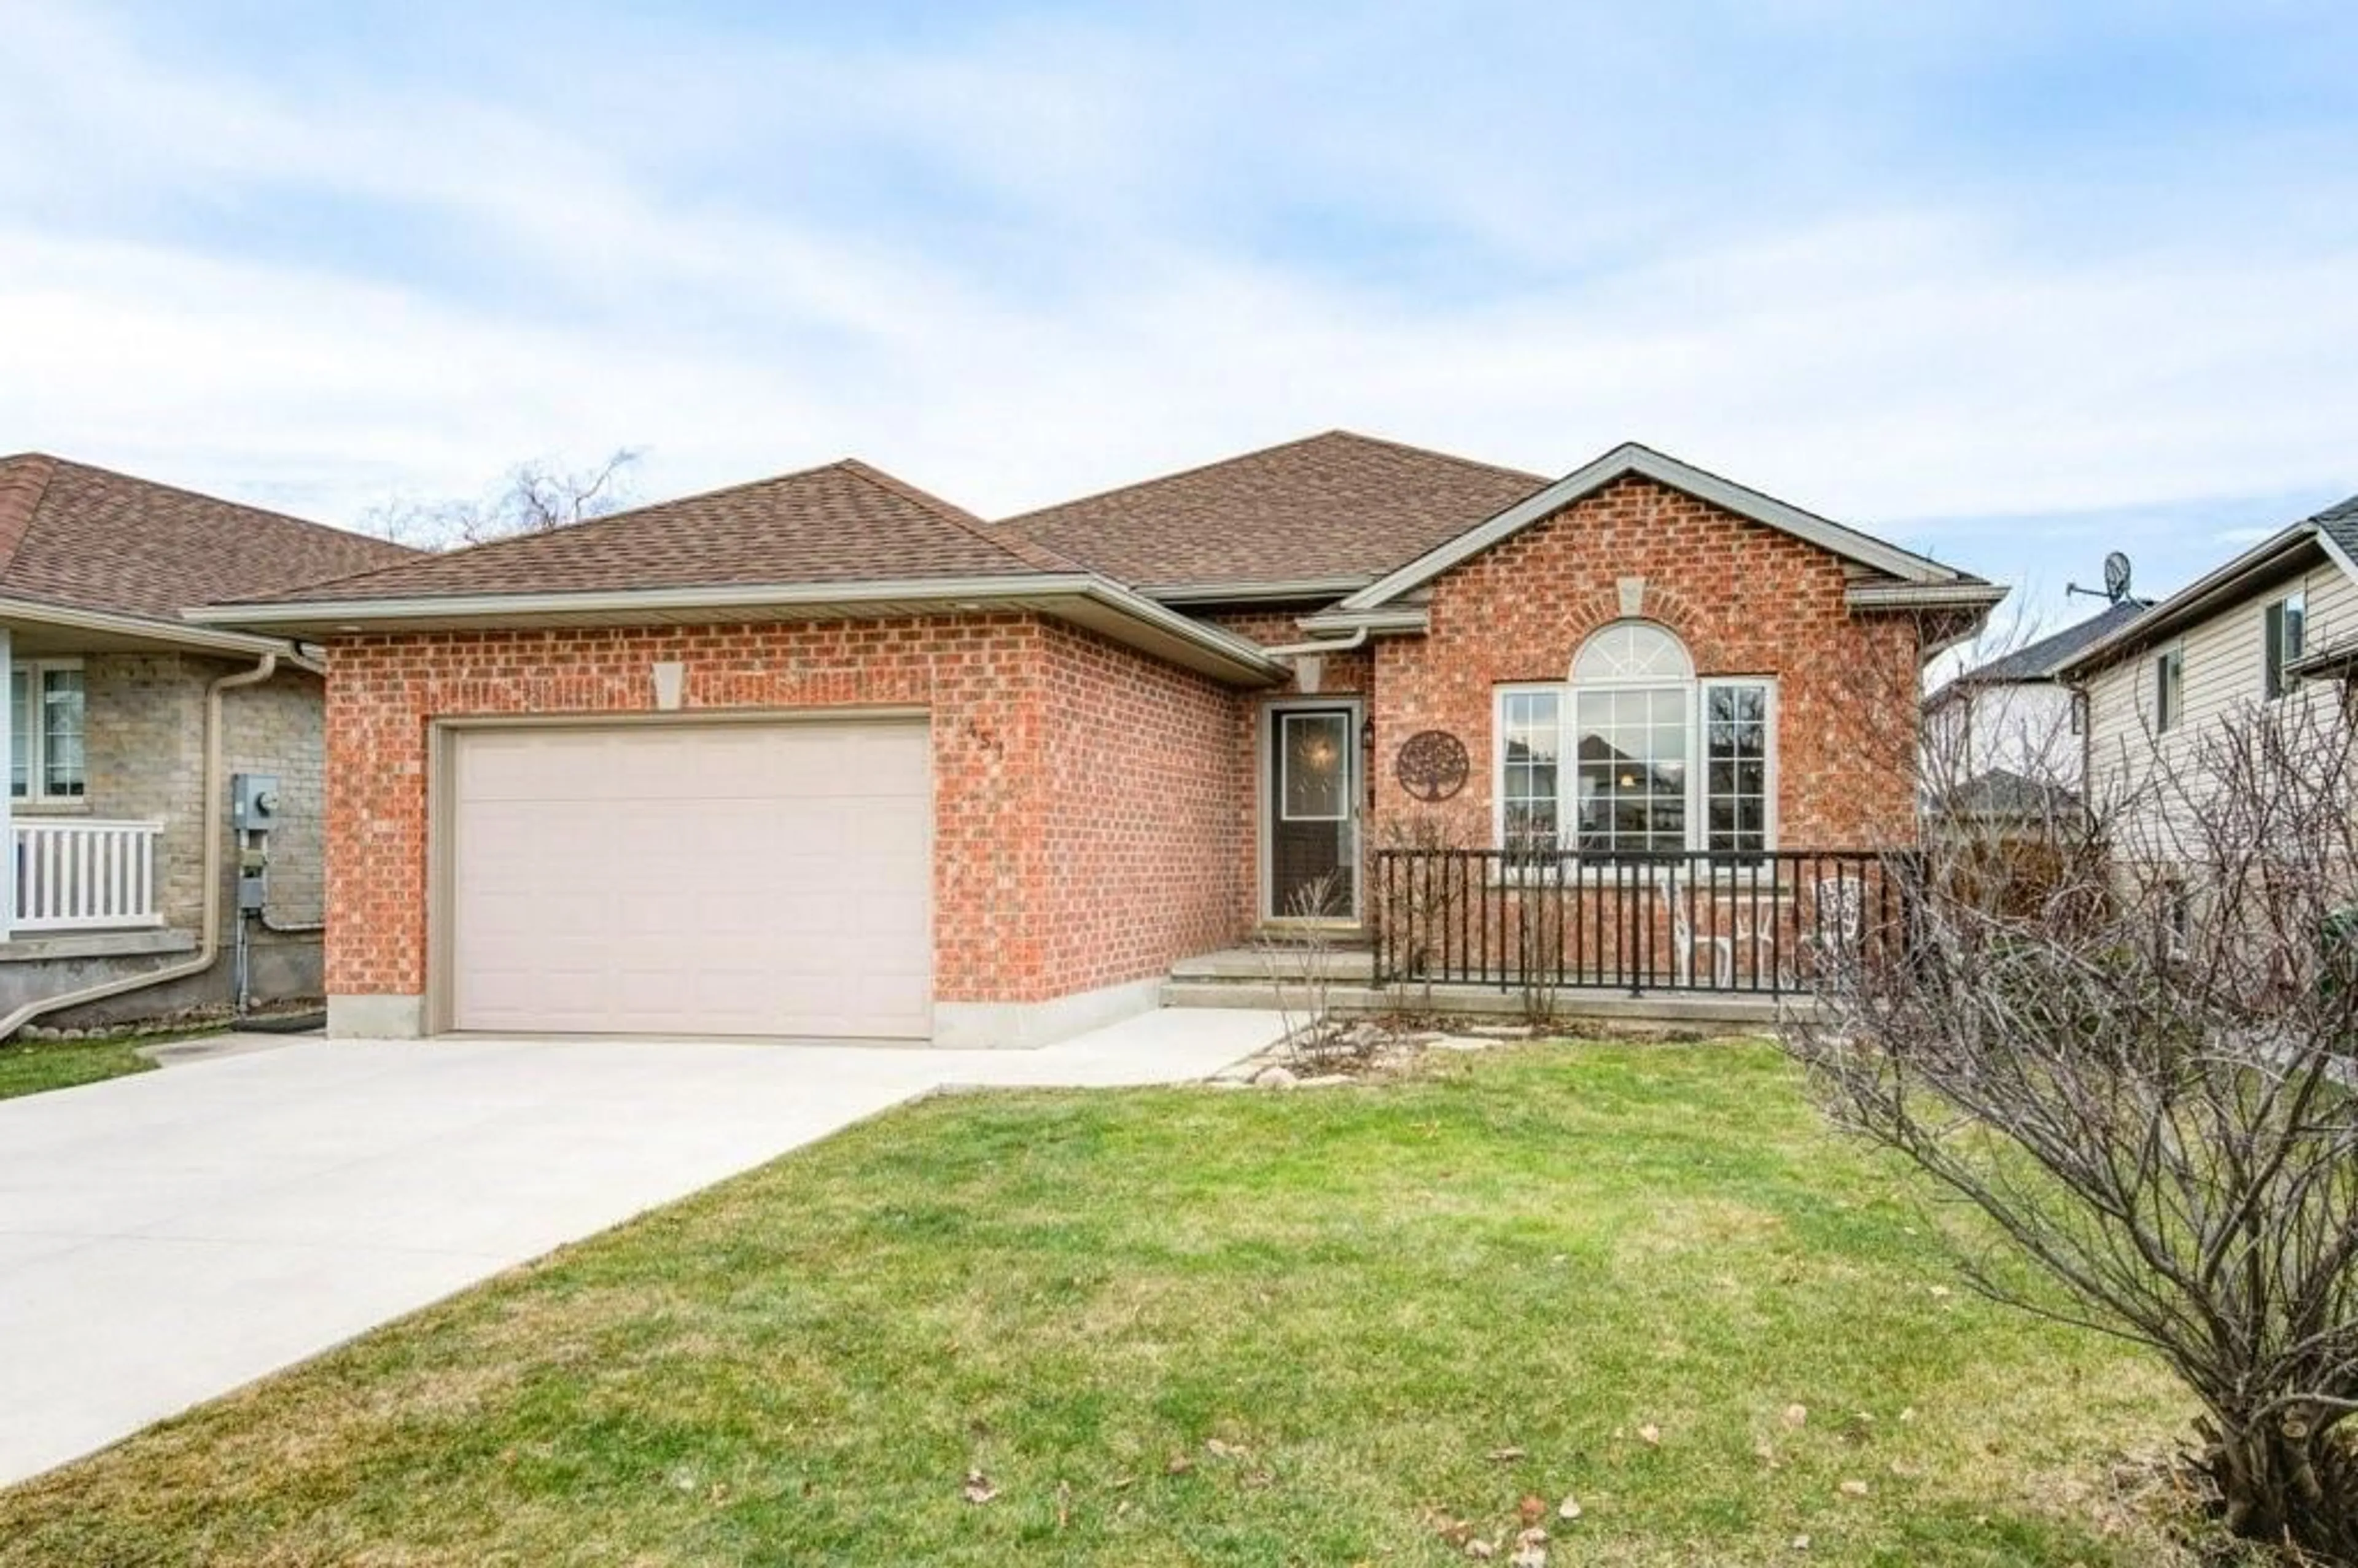 Home with brick exterior material for 451 Highview Dr, St. Thomas Ontario N5R 6H3